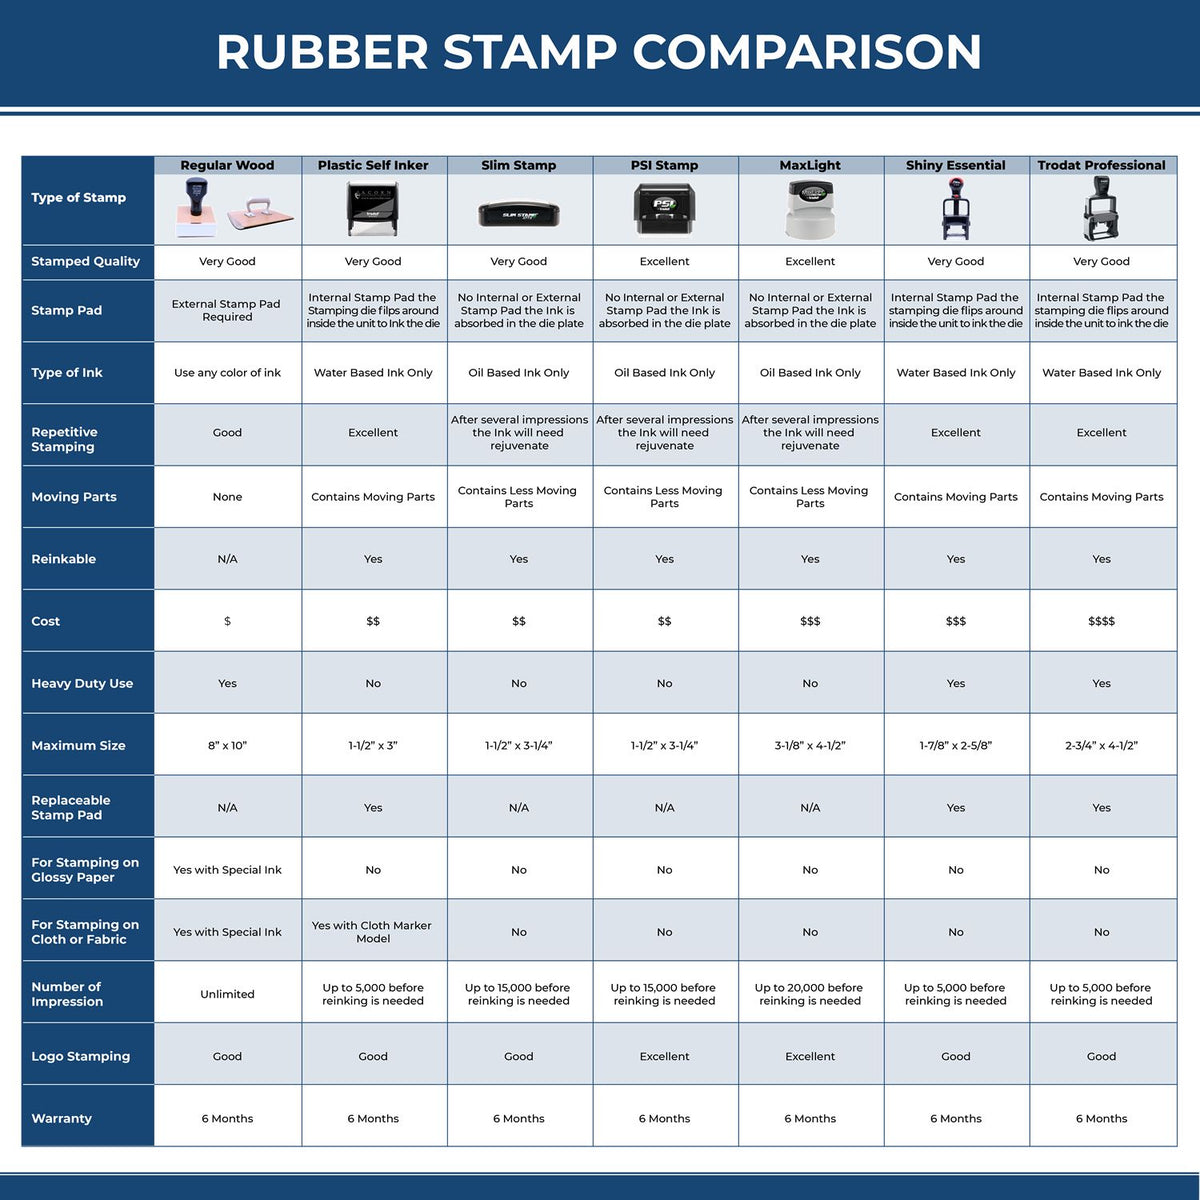 A comparison chart for the different types of mount models available for the Self-Inking Maryland PE Stamp.